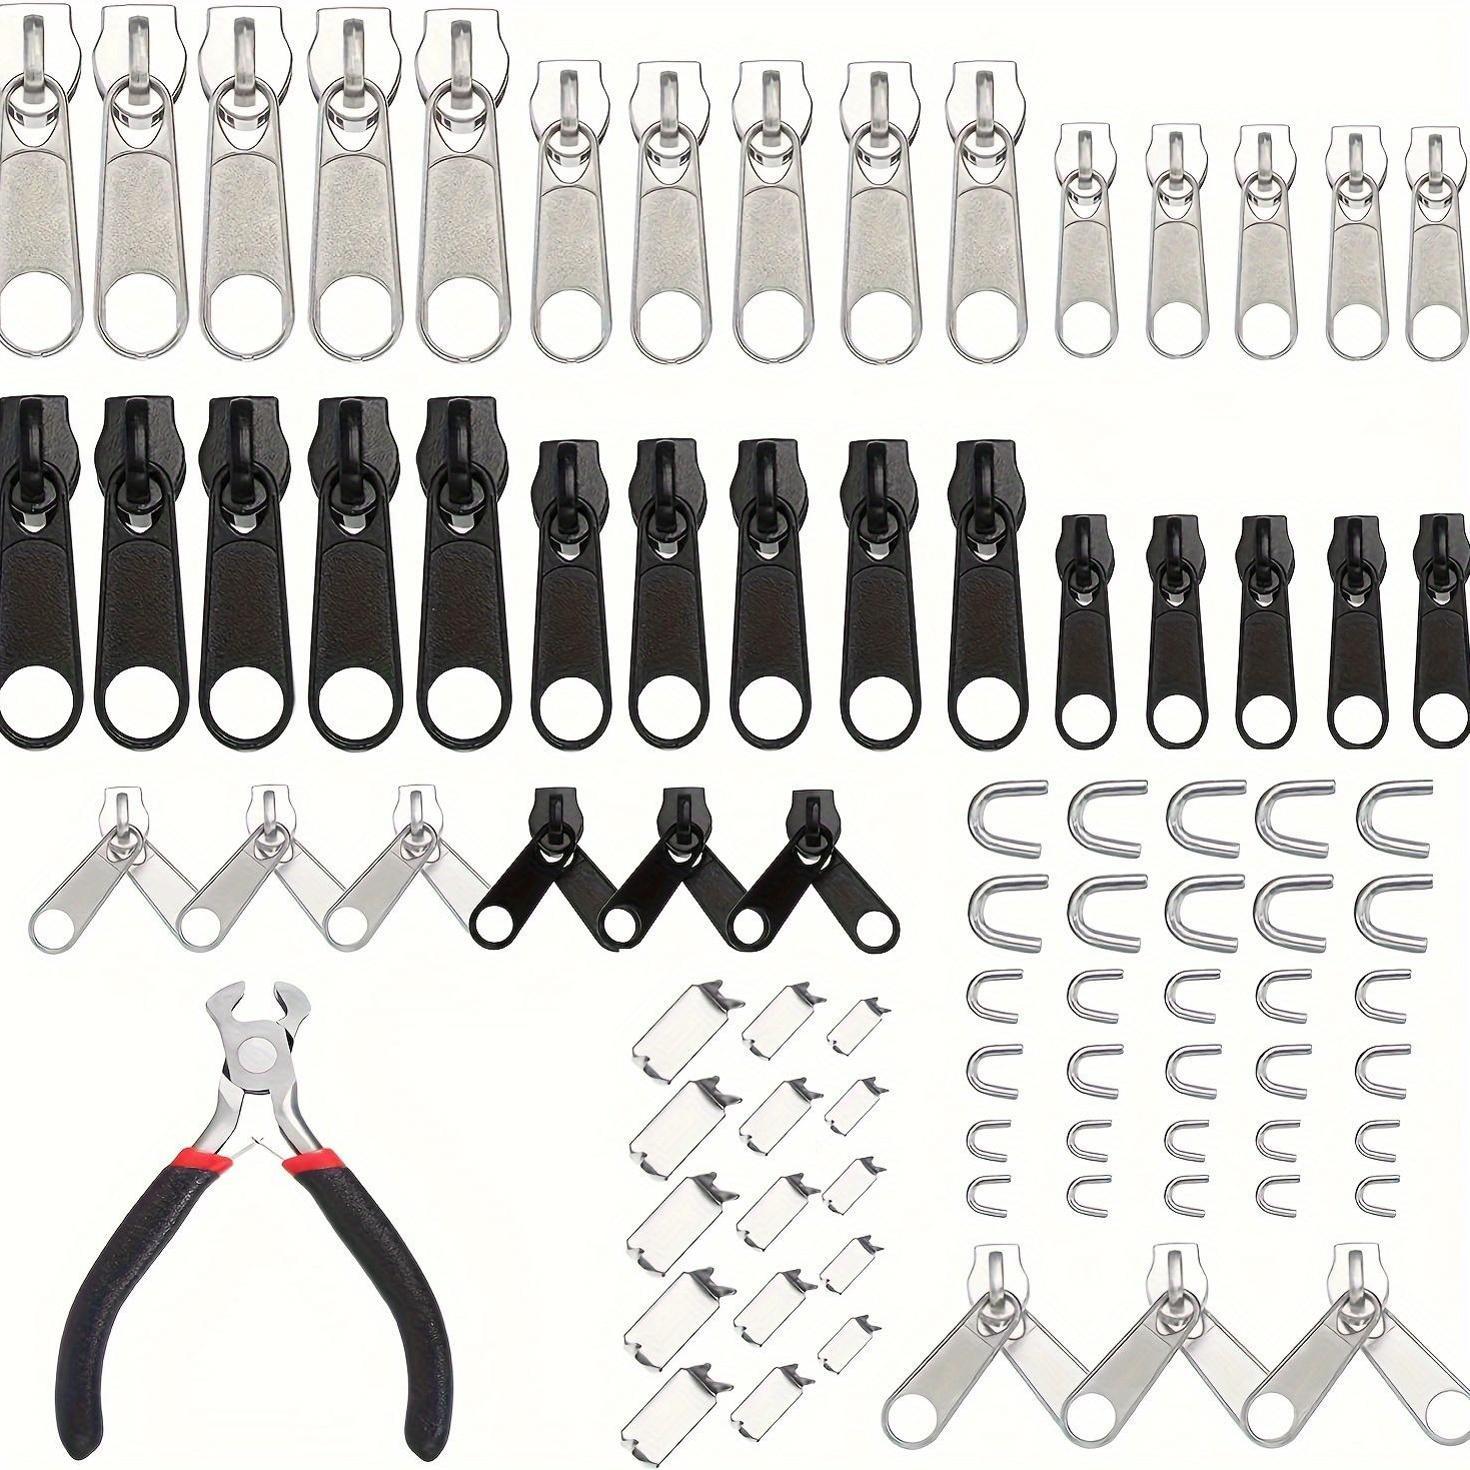 

85-piece Zipper Repair Kit With Tools & Instructions - Versatile For Sewing, Luggage, Jackets, Coats & Jeans! Mixed/black Colors